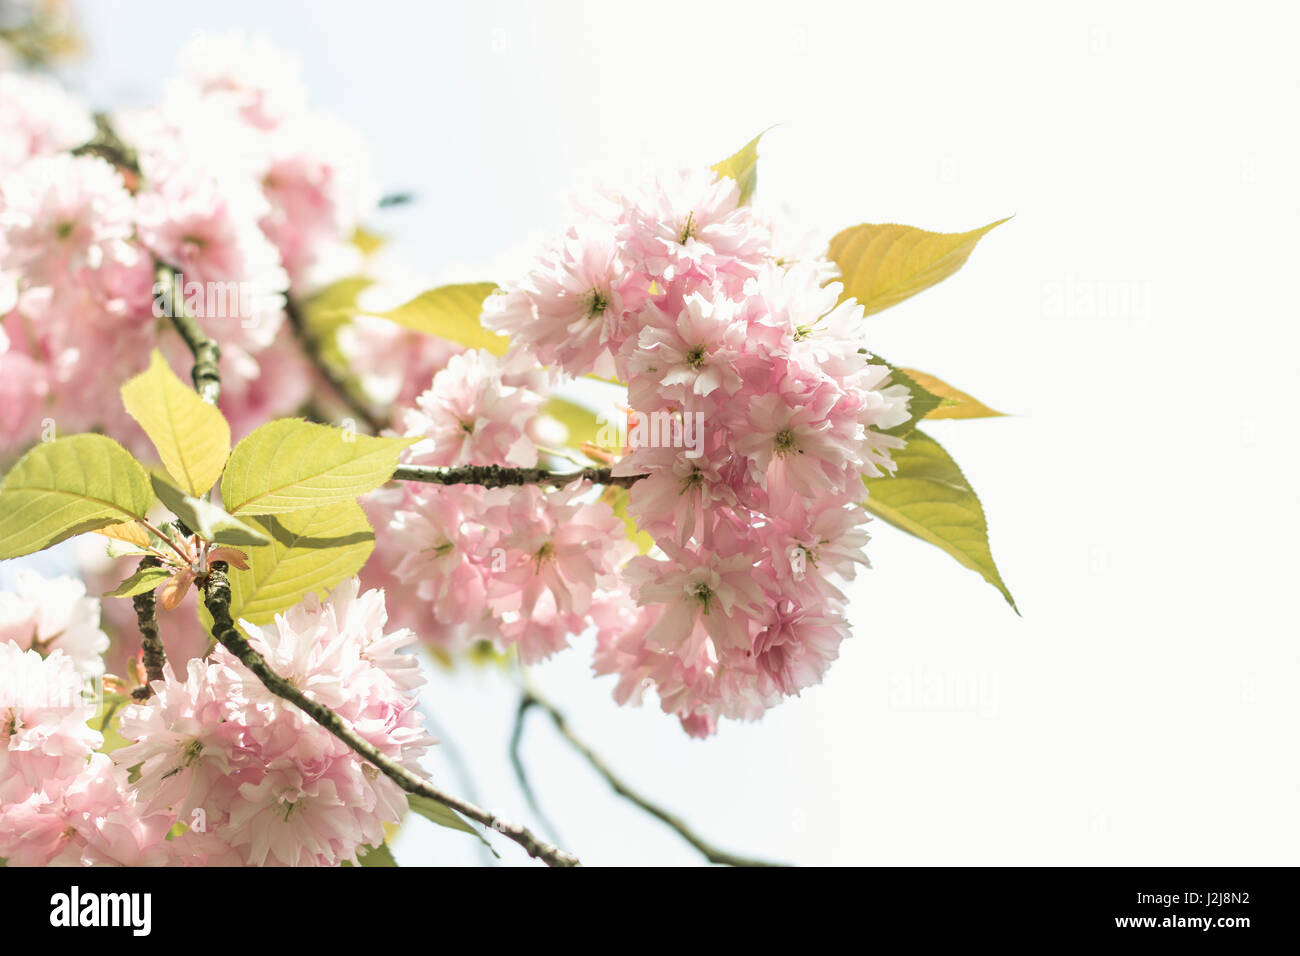 ornamental cherry tree blossoms in abundance on a branch. Stock Photo